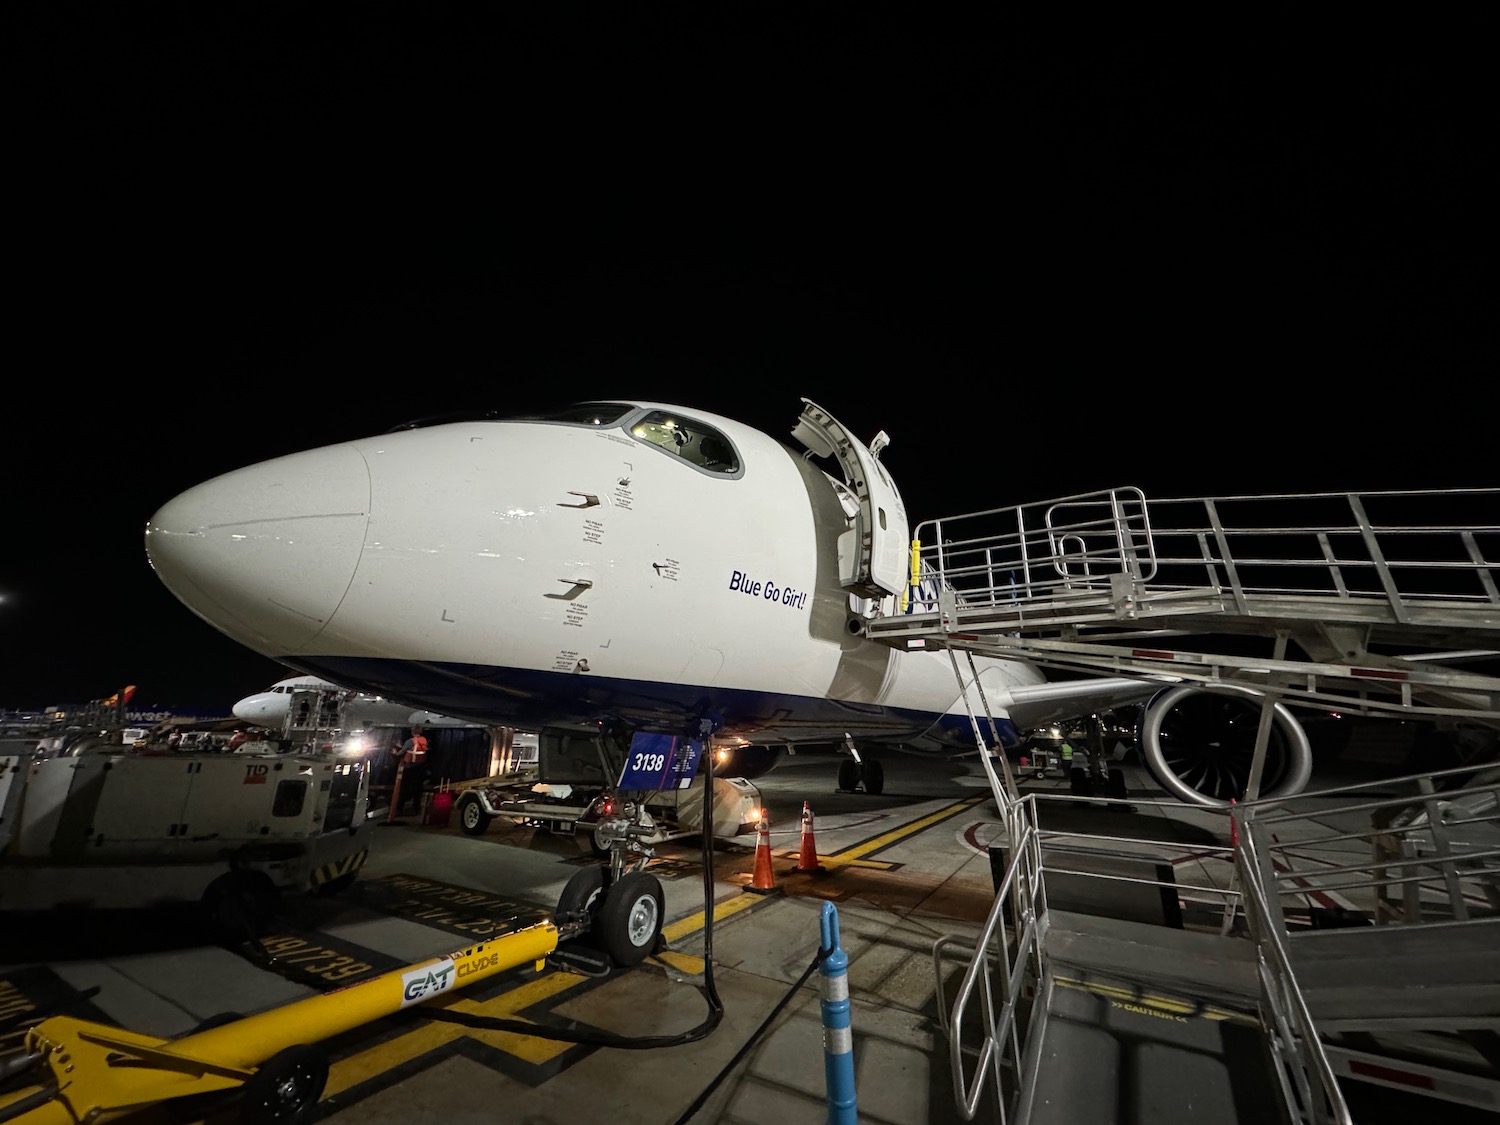 a plane at night with a ladder